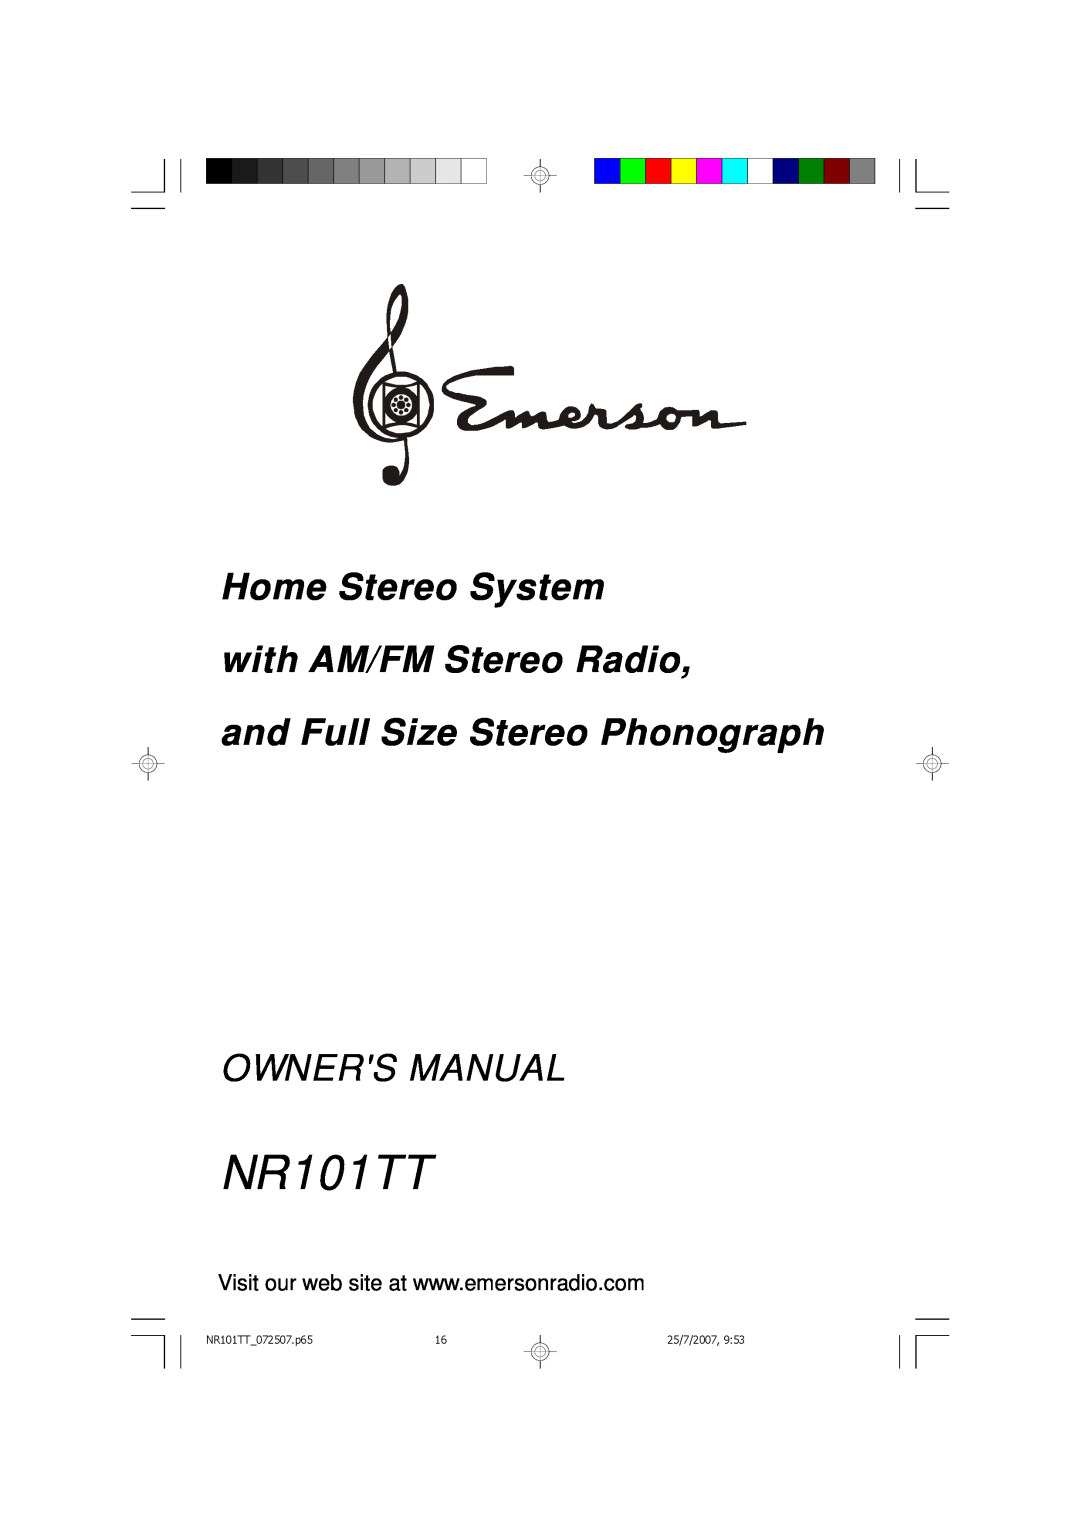 Emerson NR101TT owner manual Home Stereo System with AM/FM Stereo Radio, and Full Size Stereo Phonograph, 25/7/2007 